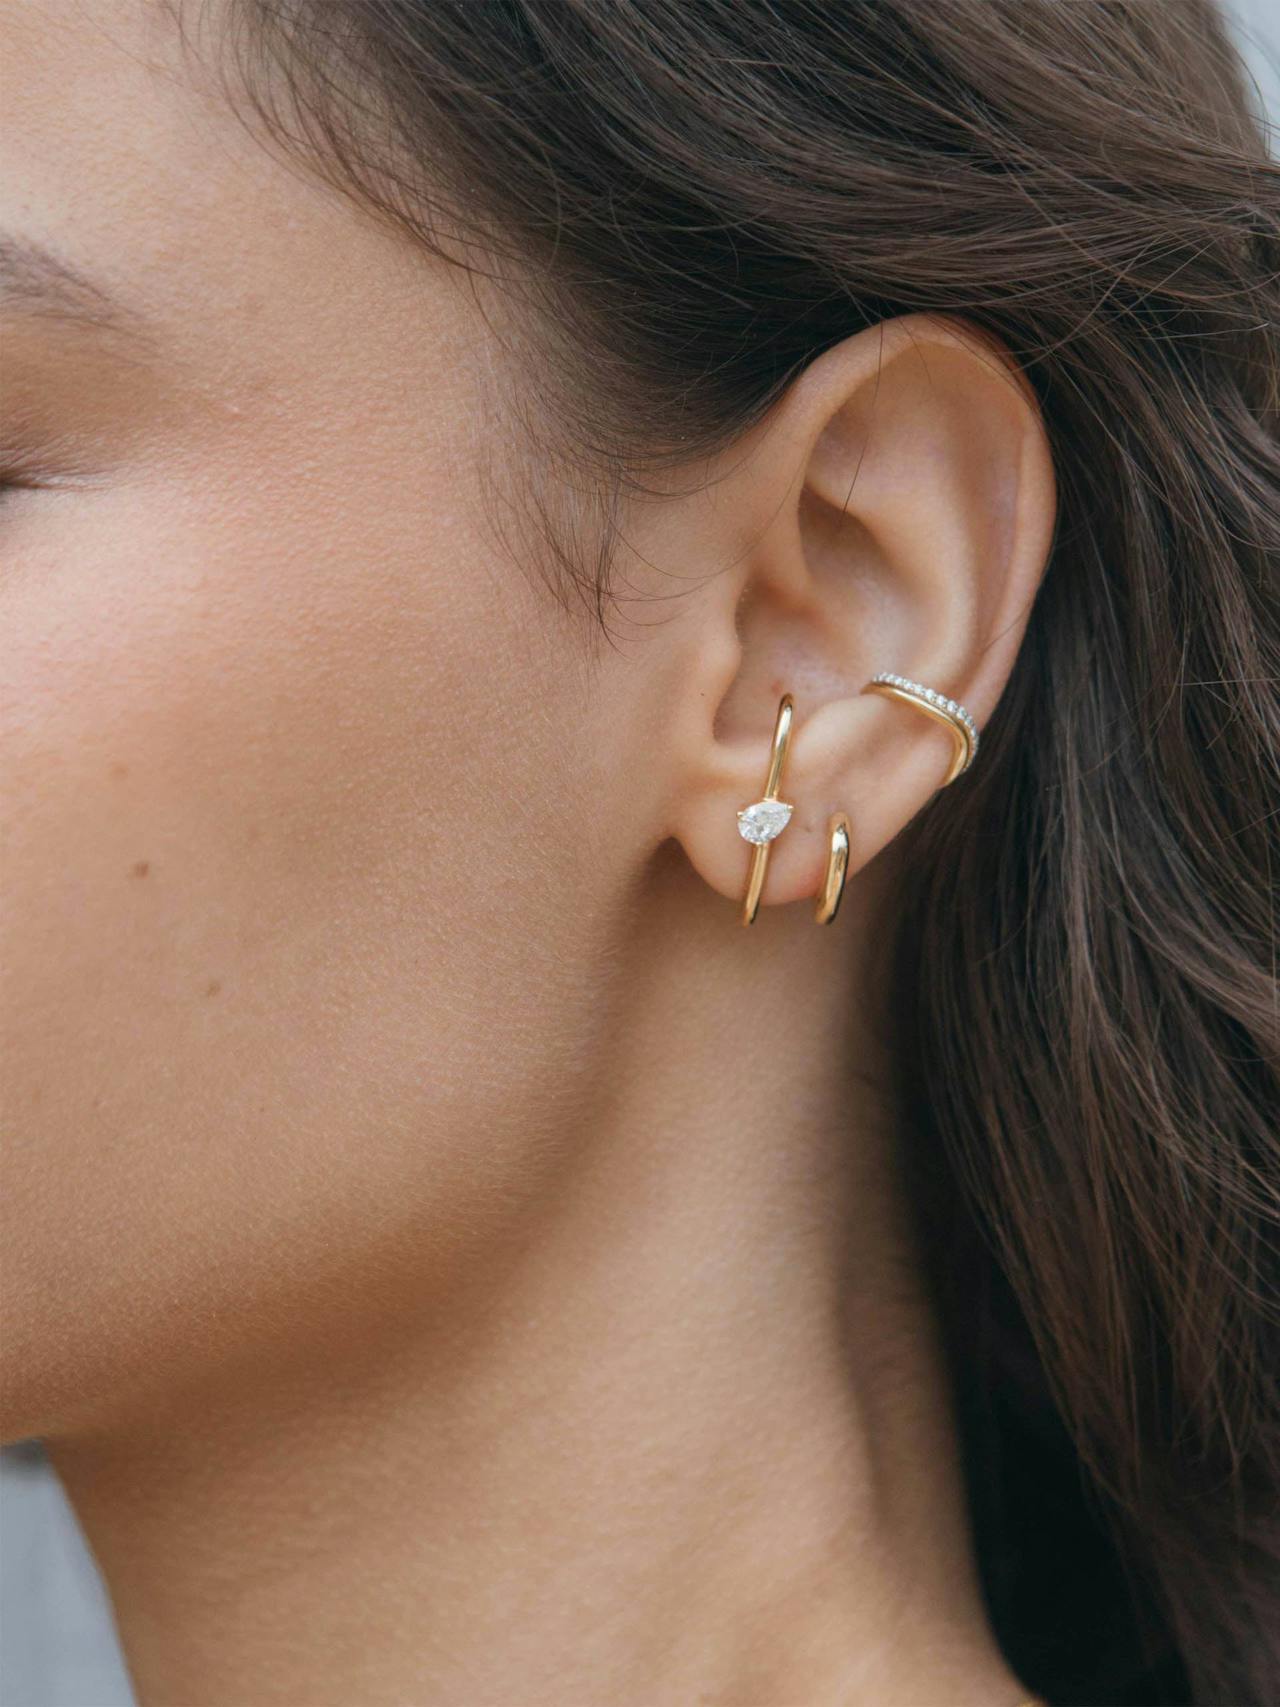 No need for piercings with our statement Double ear cuff. Inspired by the organic forms of nature, this is crafted from recycled 18k gold in an undulating shape.